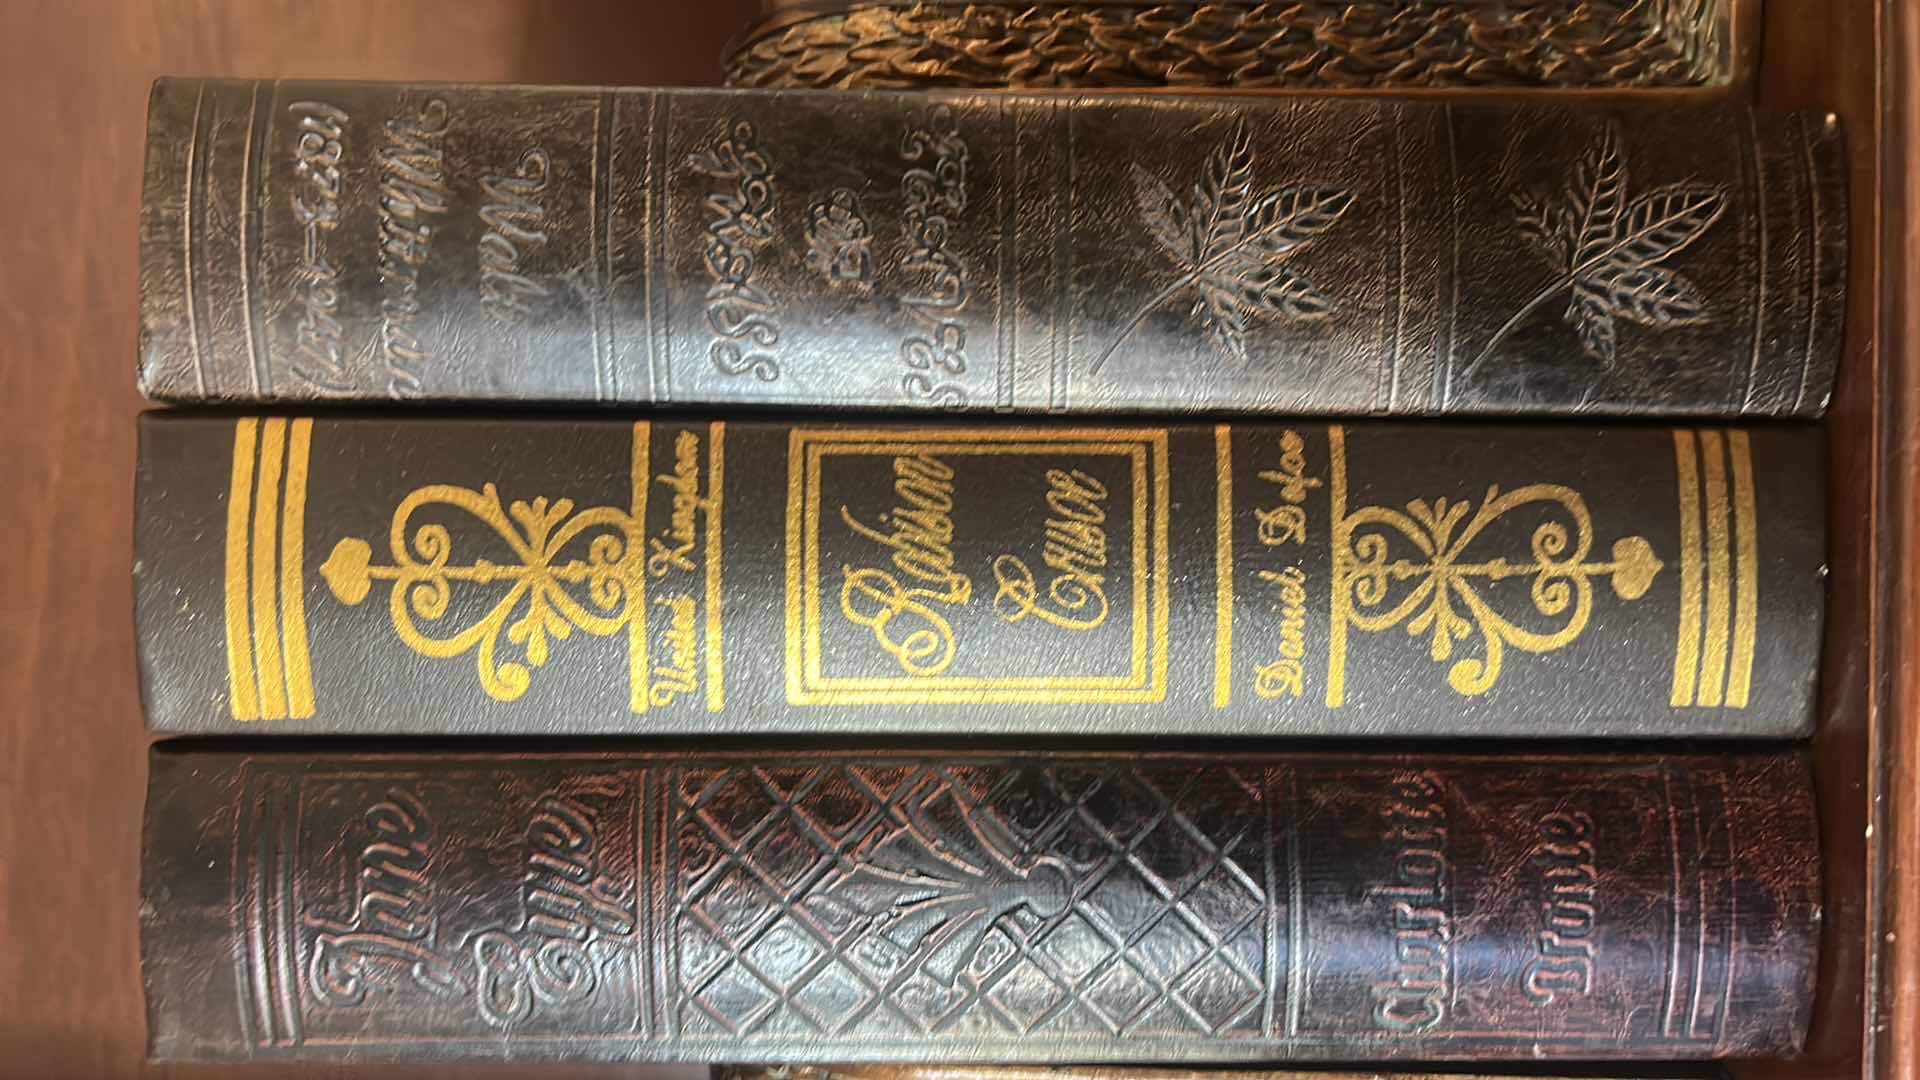 Photo 3 of ORNATE BOOKENDS w 3 FAUX HARDCOVER BOOKS